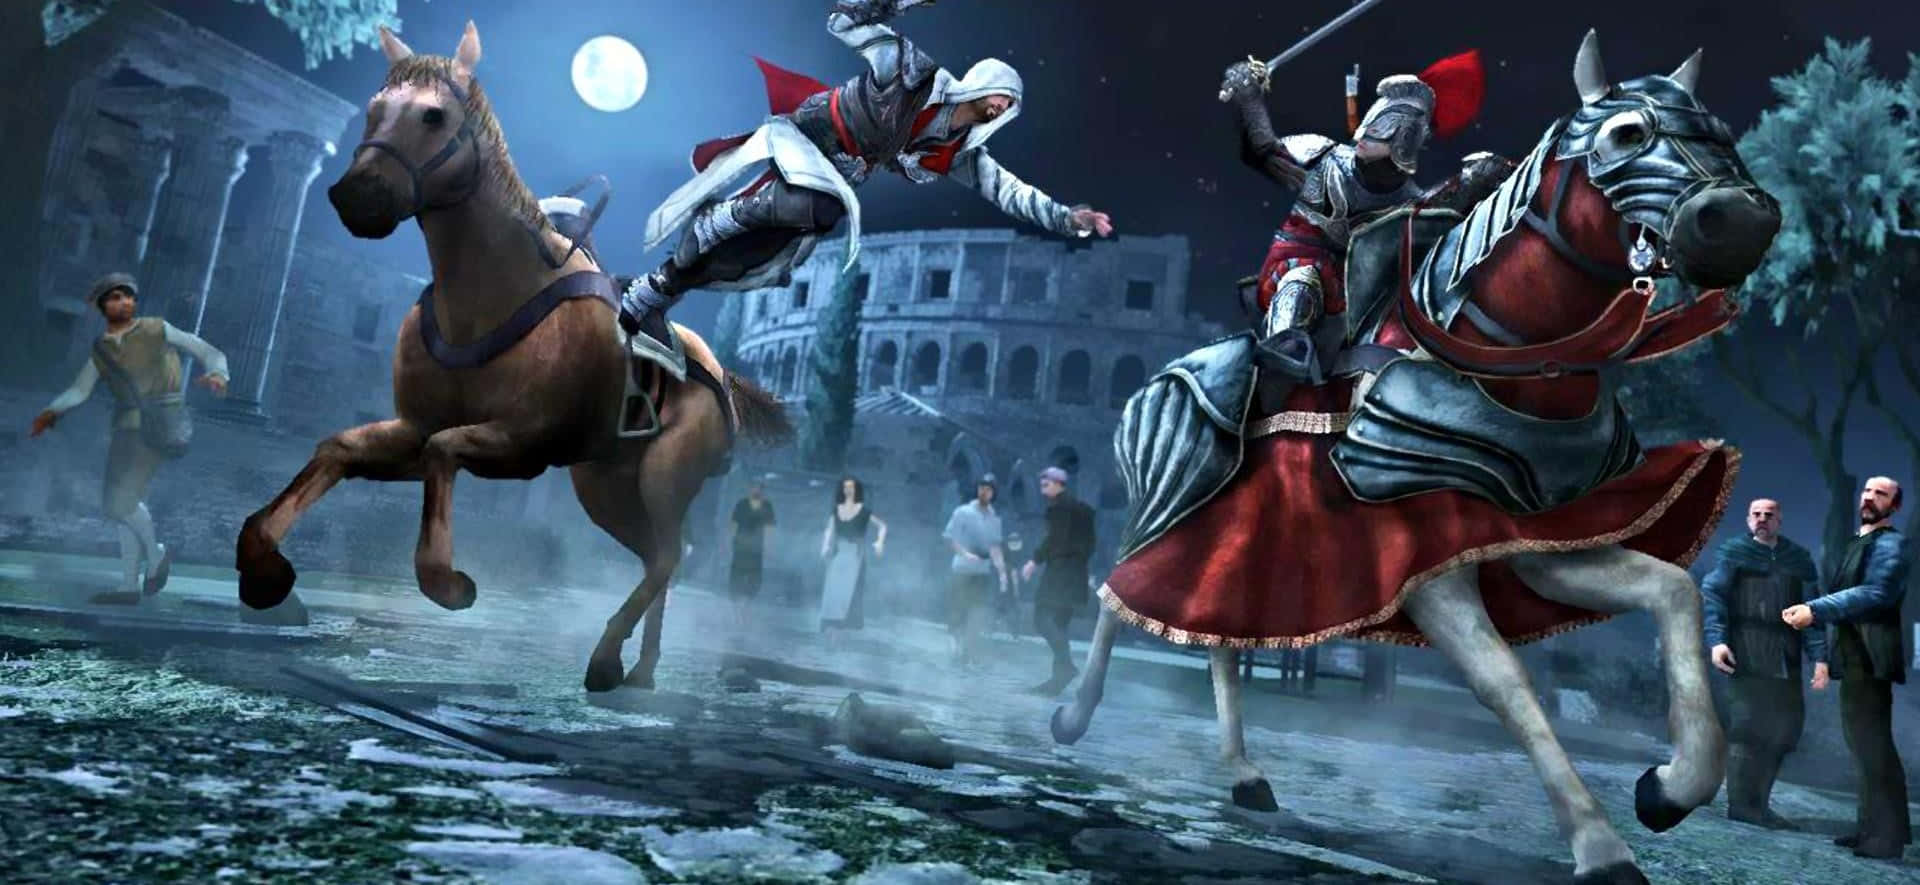 Assassin's Creed Brotherhood characters in intense action Wallpaper